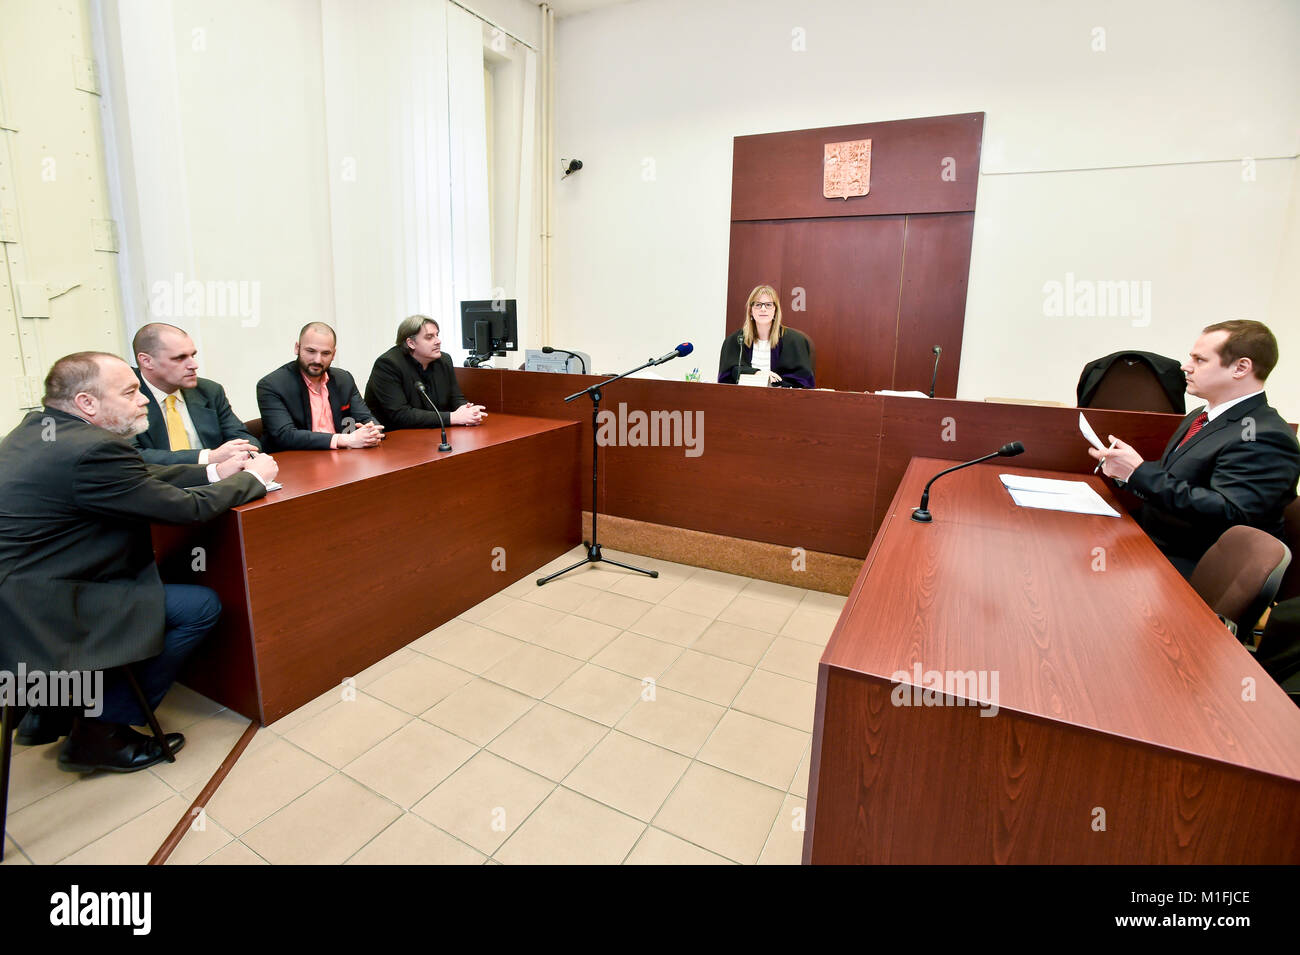 Kidnapped Czechs L-R Jan Svarc, Miroslav Dobes, Adam Homsi and Pavel Kofron are seen during the court hearing in Prague, Czech Republic, on Tuesday, January 30, 2018. In the center of the photo is seen judge Edita Votockova. The Czechs who were kidnapped in Lebanon in 2015 have no right to a compensation worth 40 million crowns, as a court dismissed today their complaint about the state's failure to prevent the abduction and said it found no mistake on the part of state bodies. The verdict is not definitive and can be appealed. (CTK Photo/Vit Simanek) Stock Photo